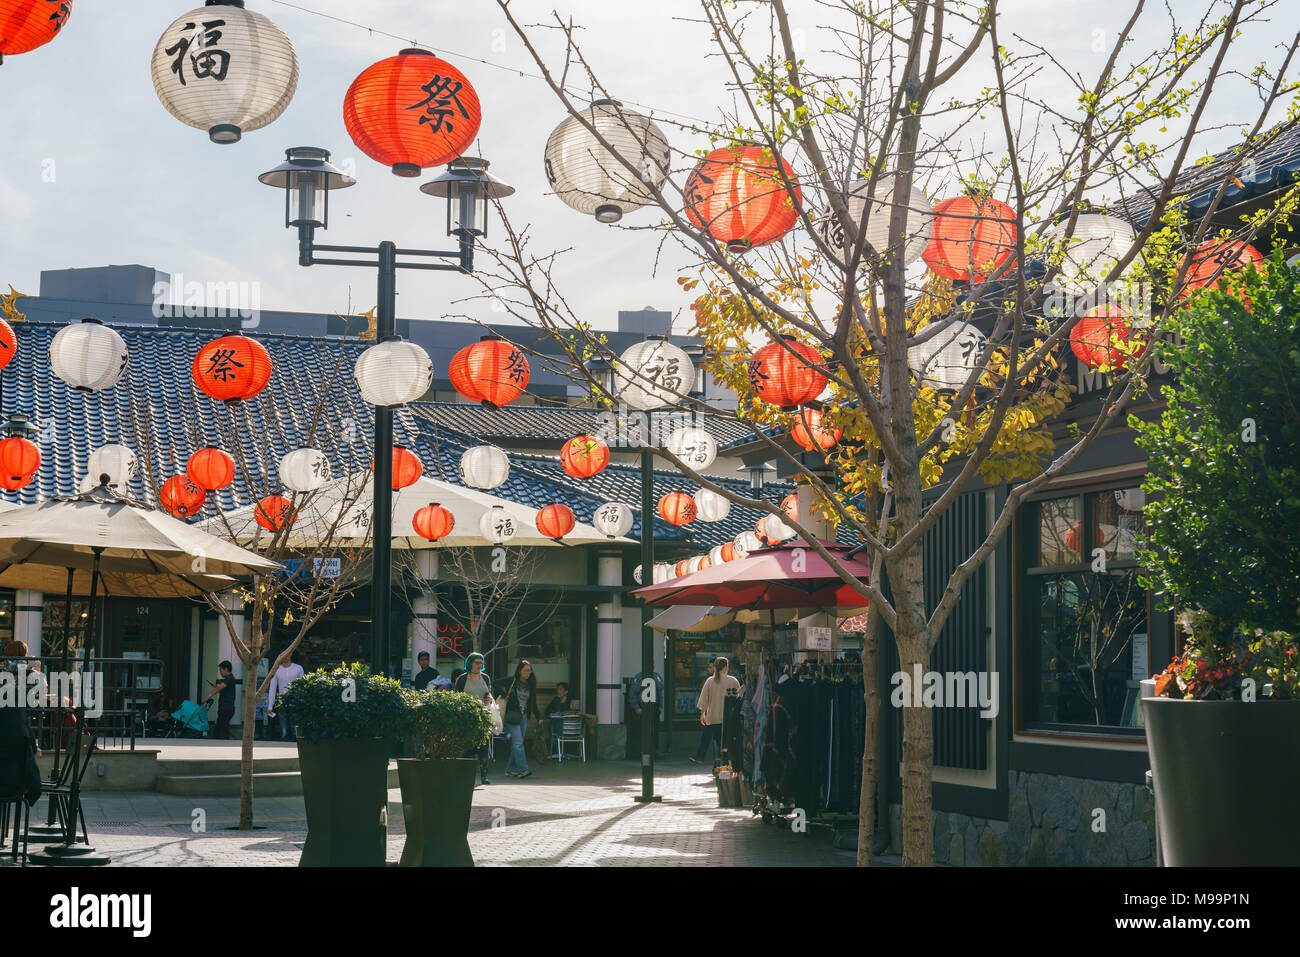 Los Angeles, MAR 3: Many red and white lanterns hanging over the Japanese Village Plaza on MAR 3, 2018 at Los Angeles Stock Photo